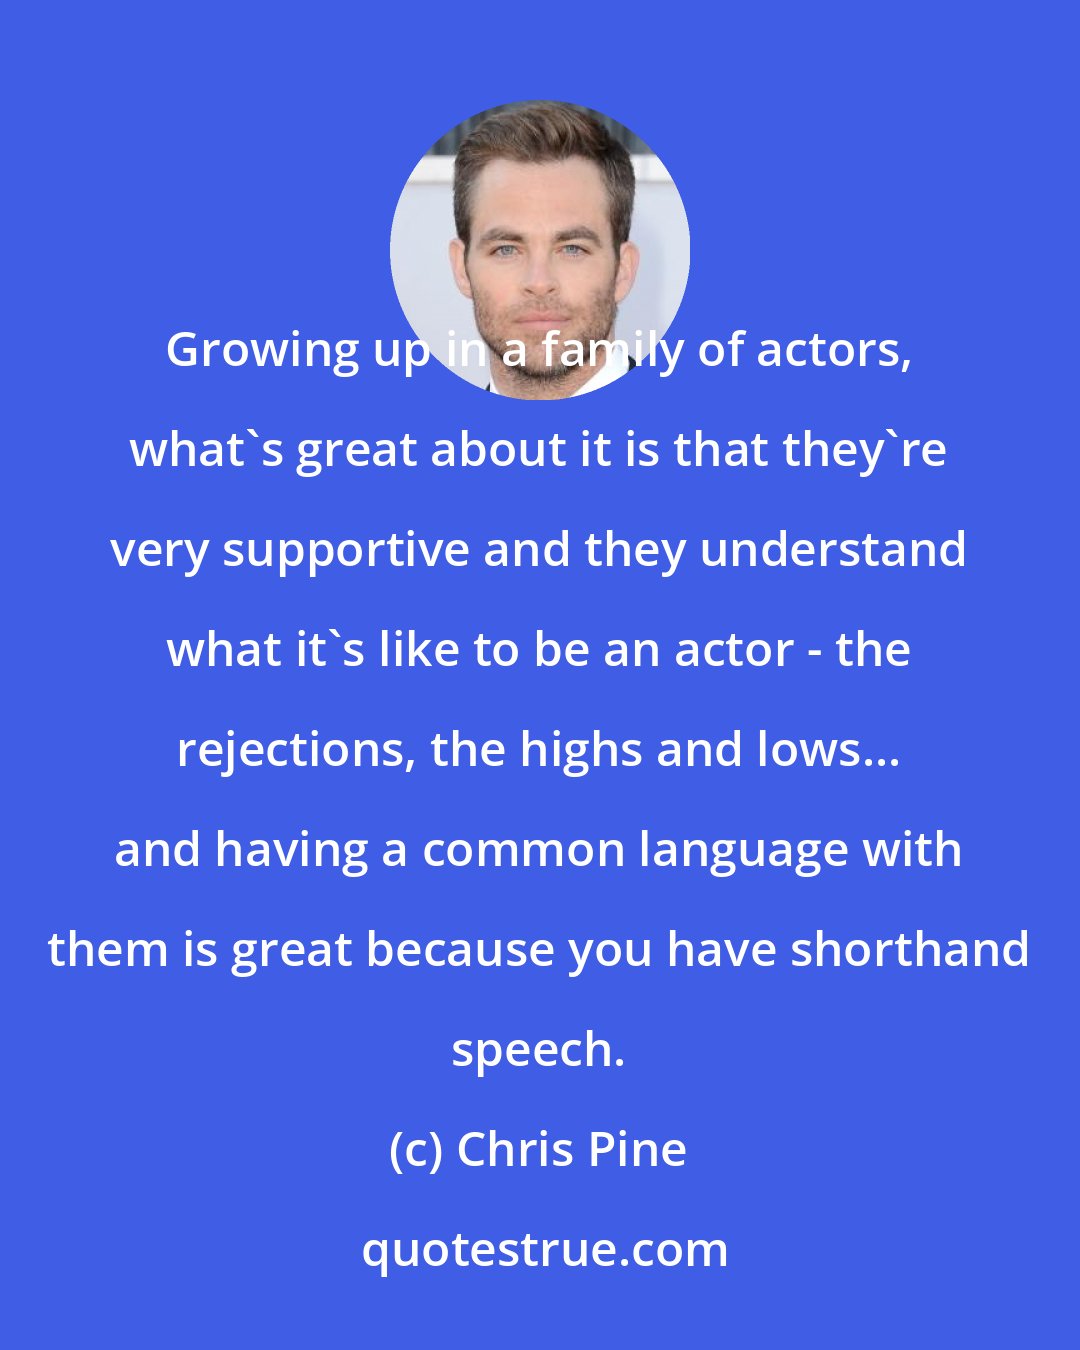 Chris Pine: Growing up in a family of actors, what's great about it is that they're very supportive and they understand what it's like to be an actor - the rejections, the highs and lows... and having a common language with them is great because you have shorthand speech.